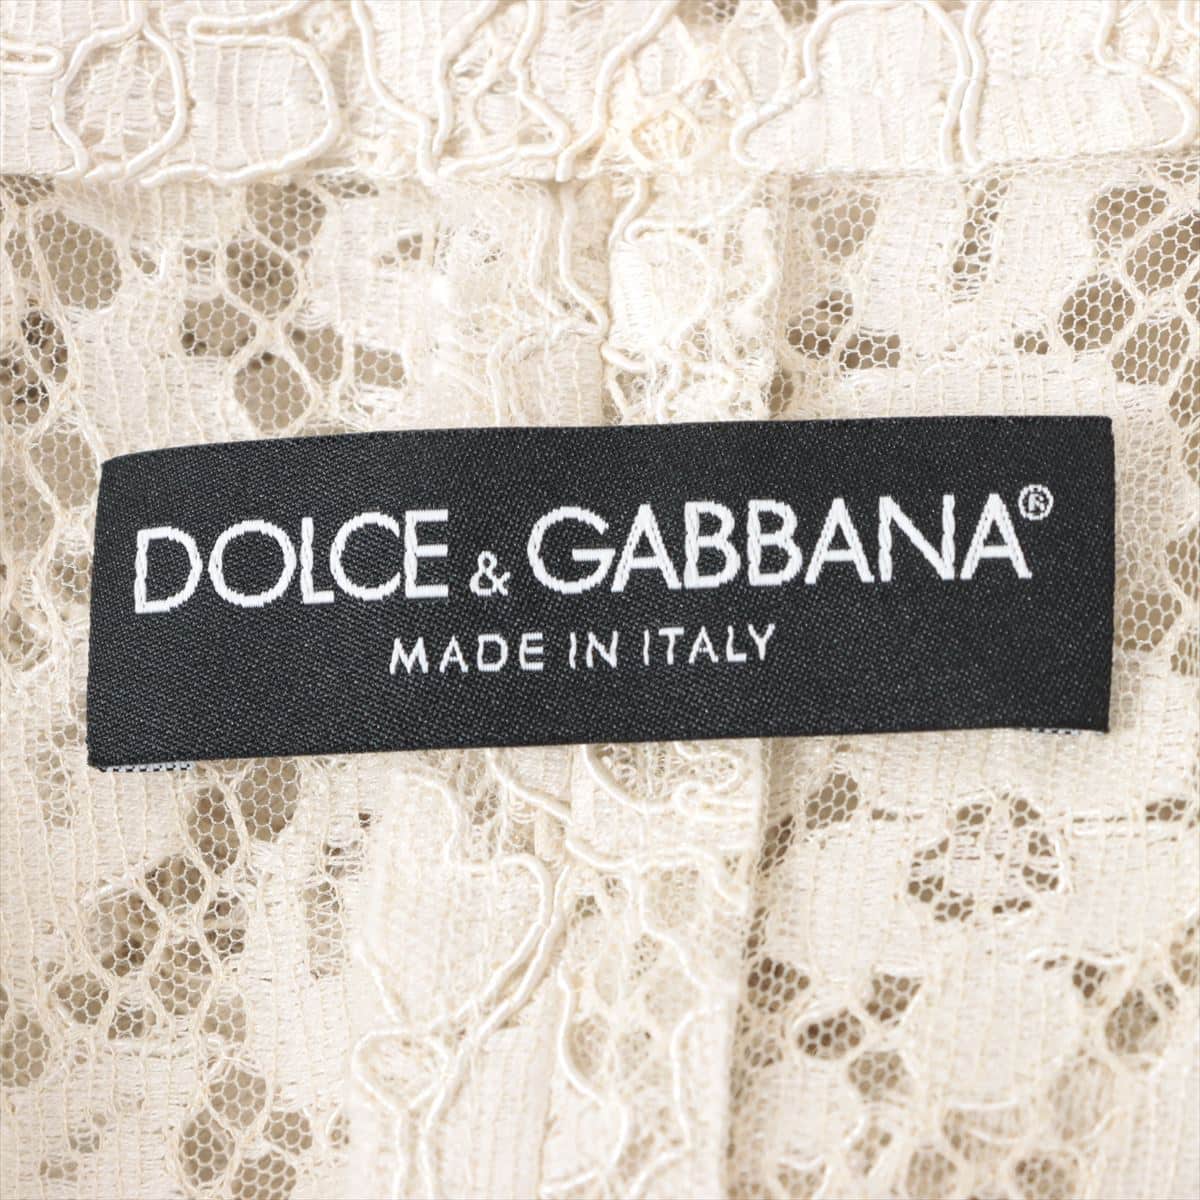 Dolce & Gabbana Cotton & rayon Setup 36 Ladies' Ivory  Camisole is out of stock